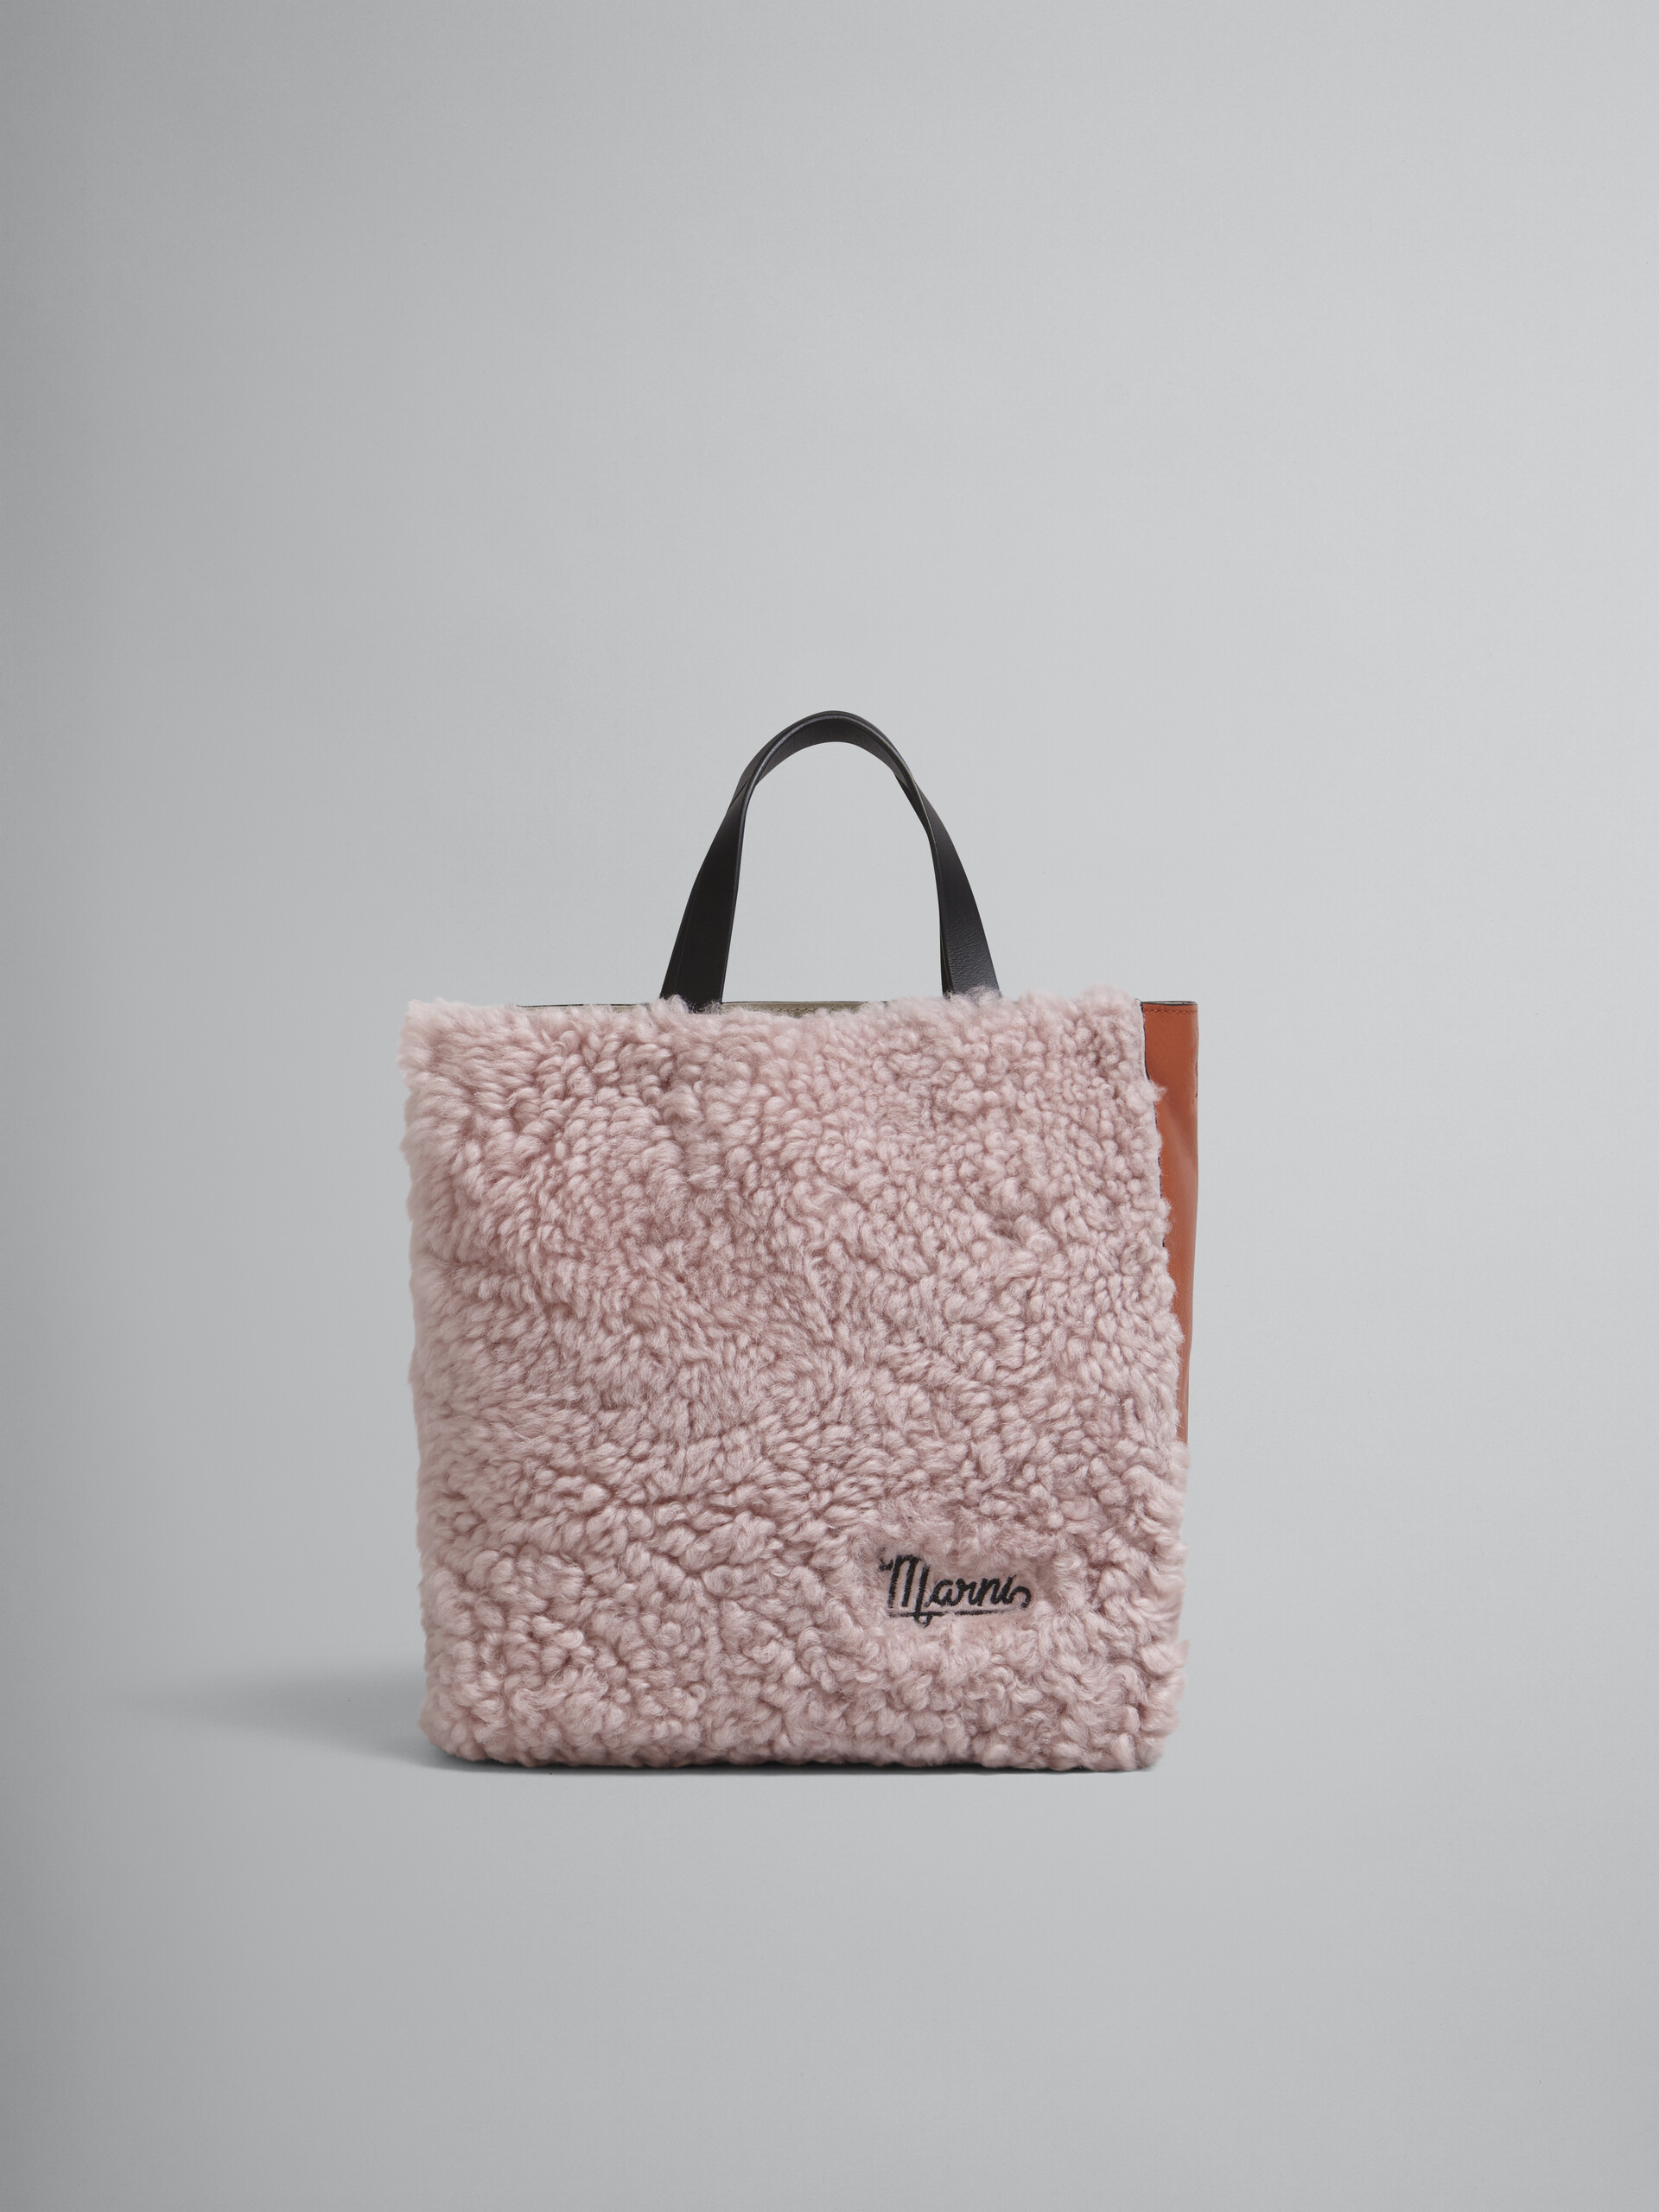 MUSEO SOFT small bag in pnk shearling - Shopping Bags - Image 1